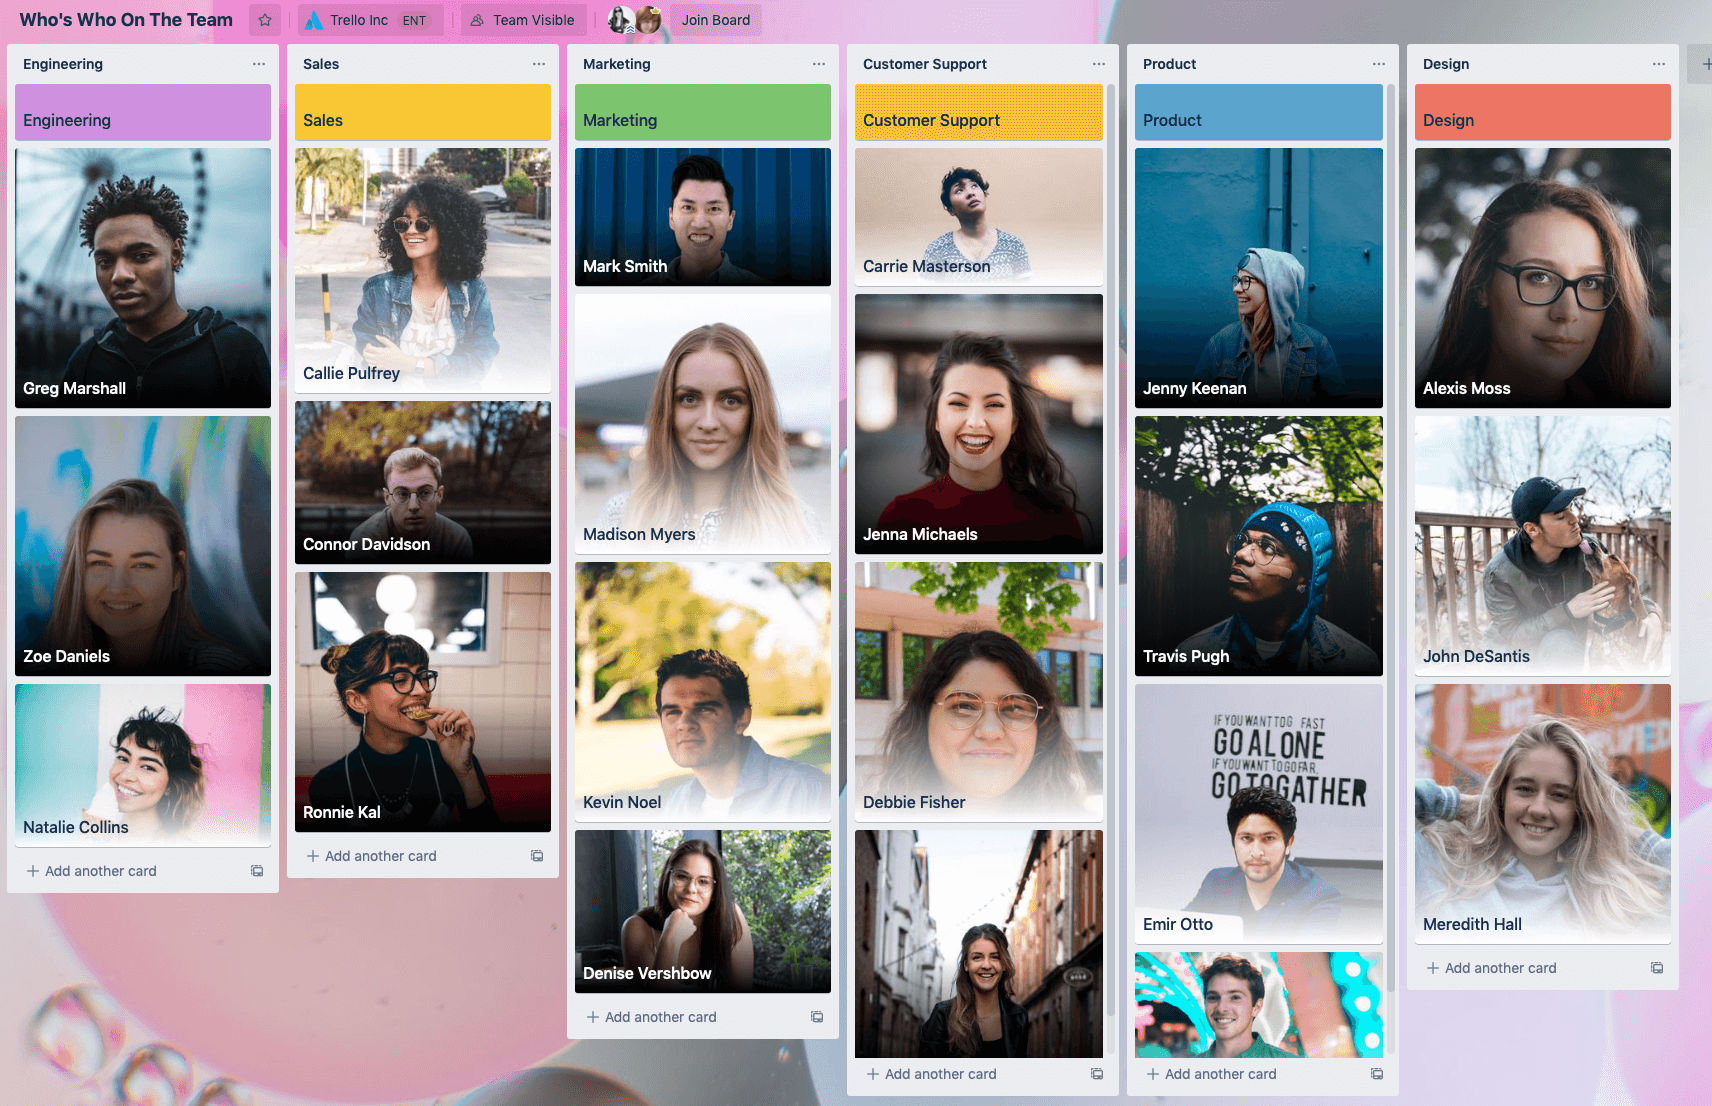 screenshot of a Trello board with photos and names of the entire team